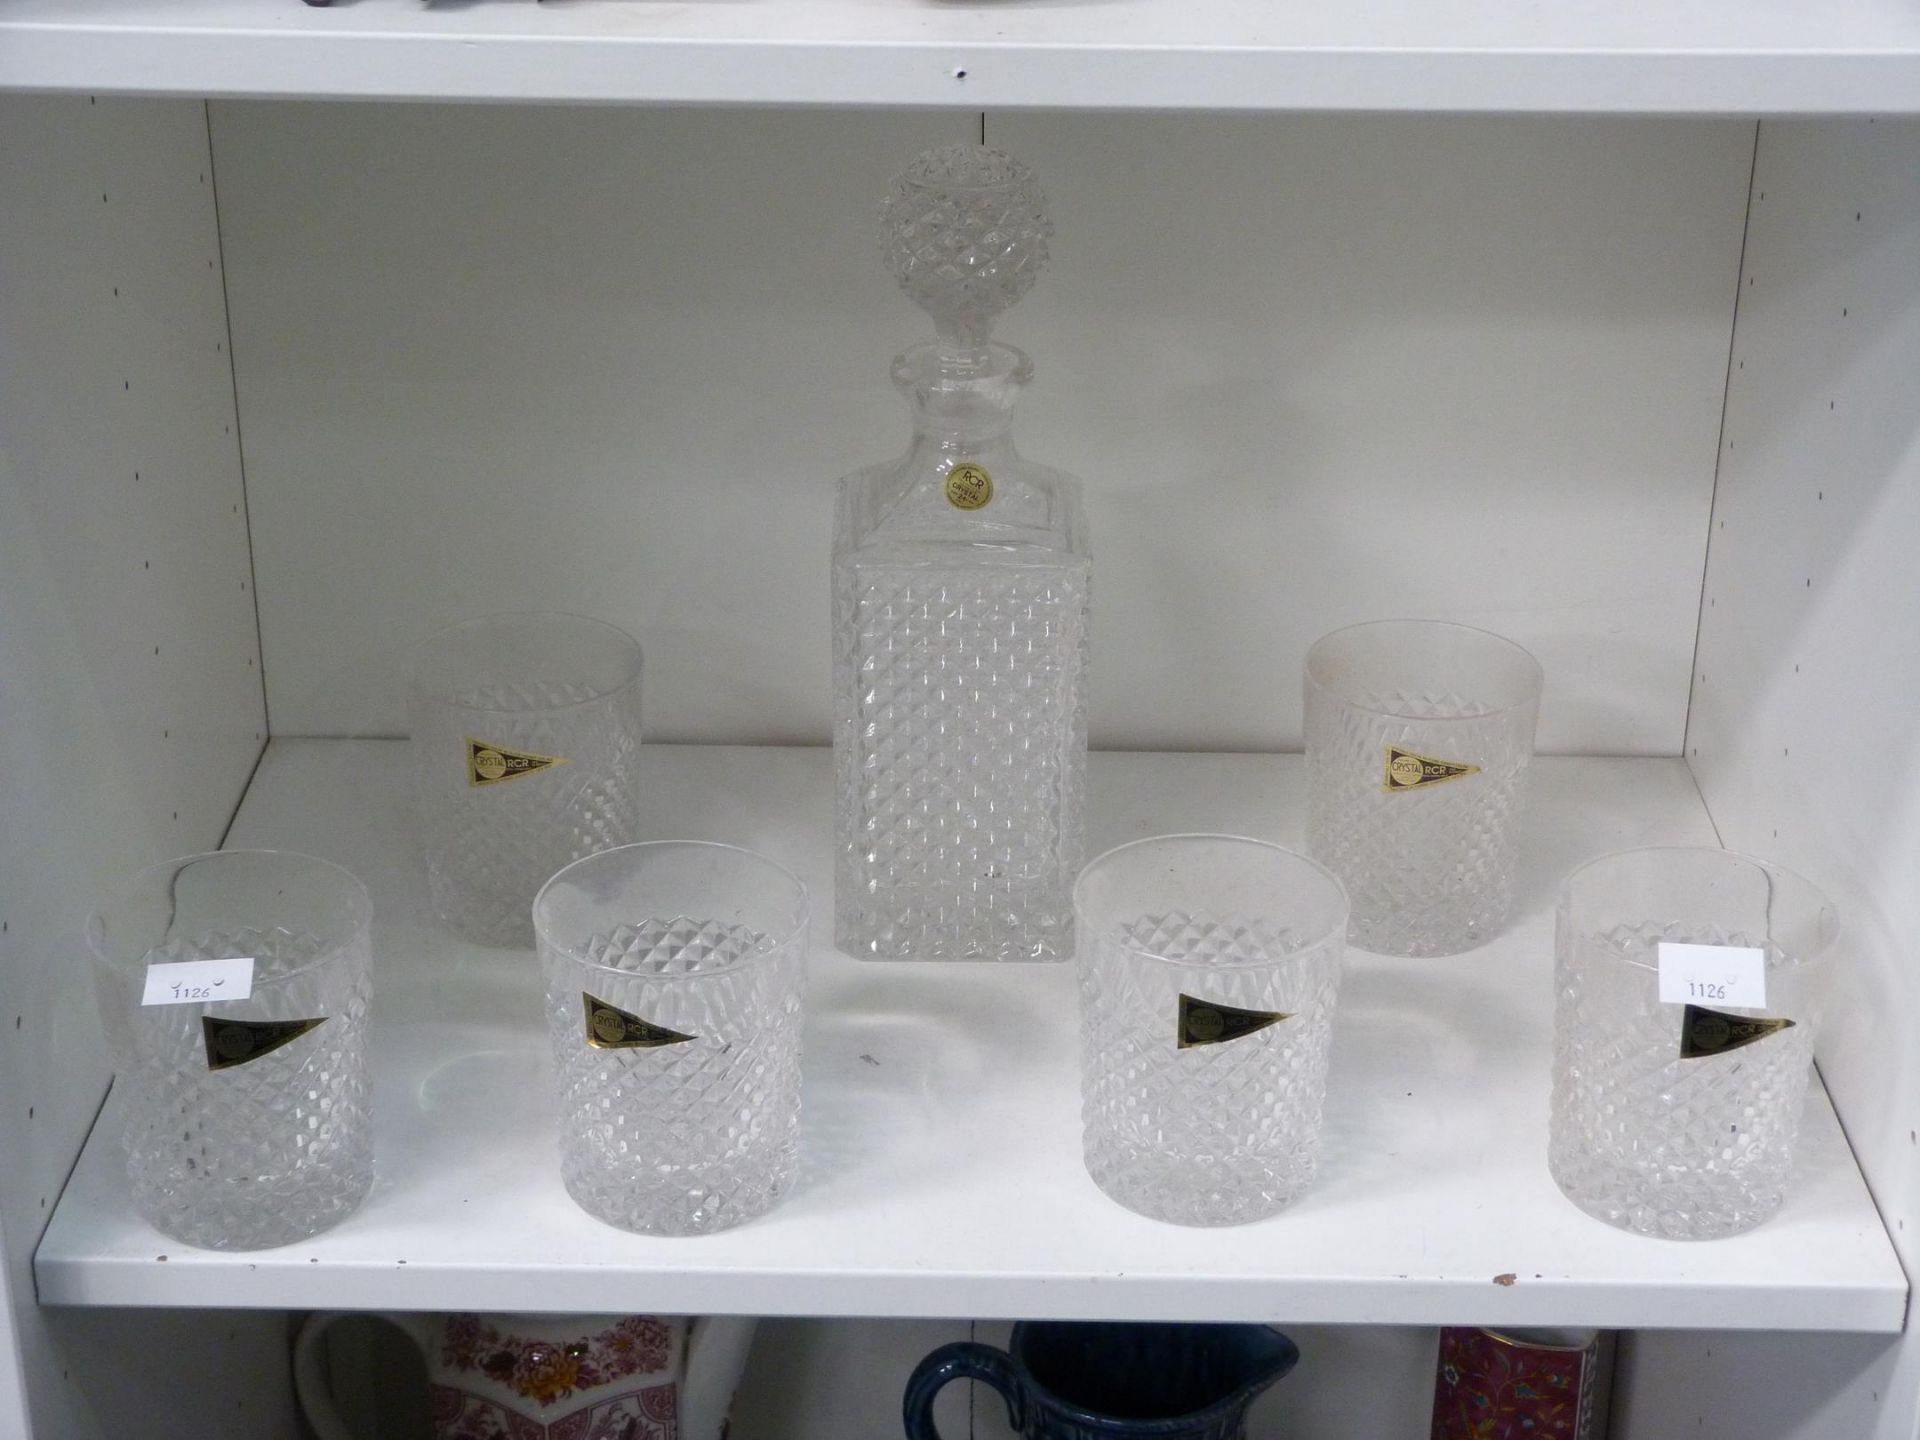 Three shelves to contain a shelf of six RCR Genuine Lead Crystal Glass Beakers with a RCR Genuine